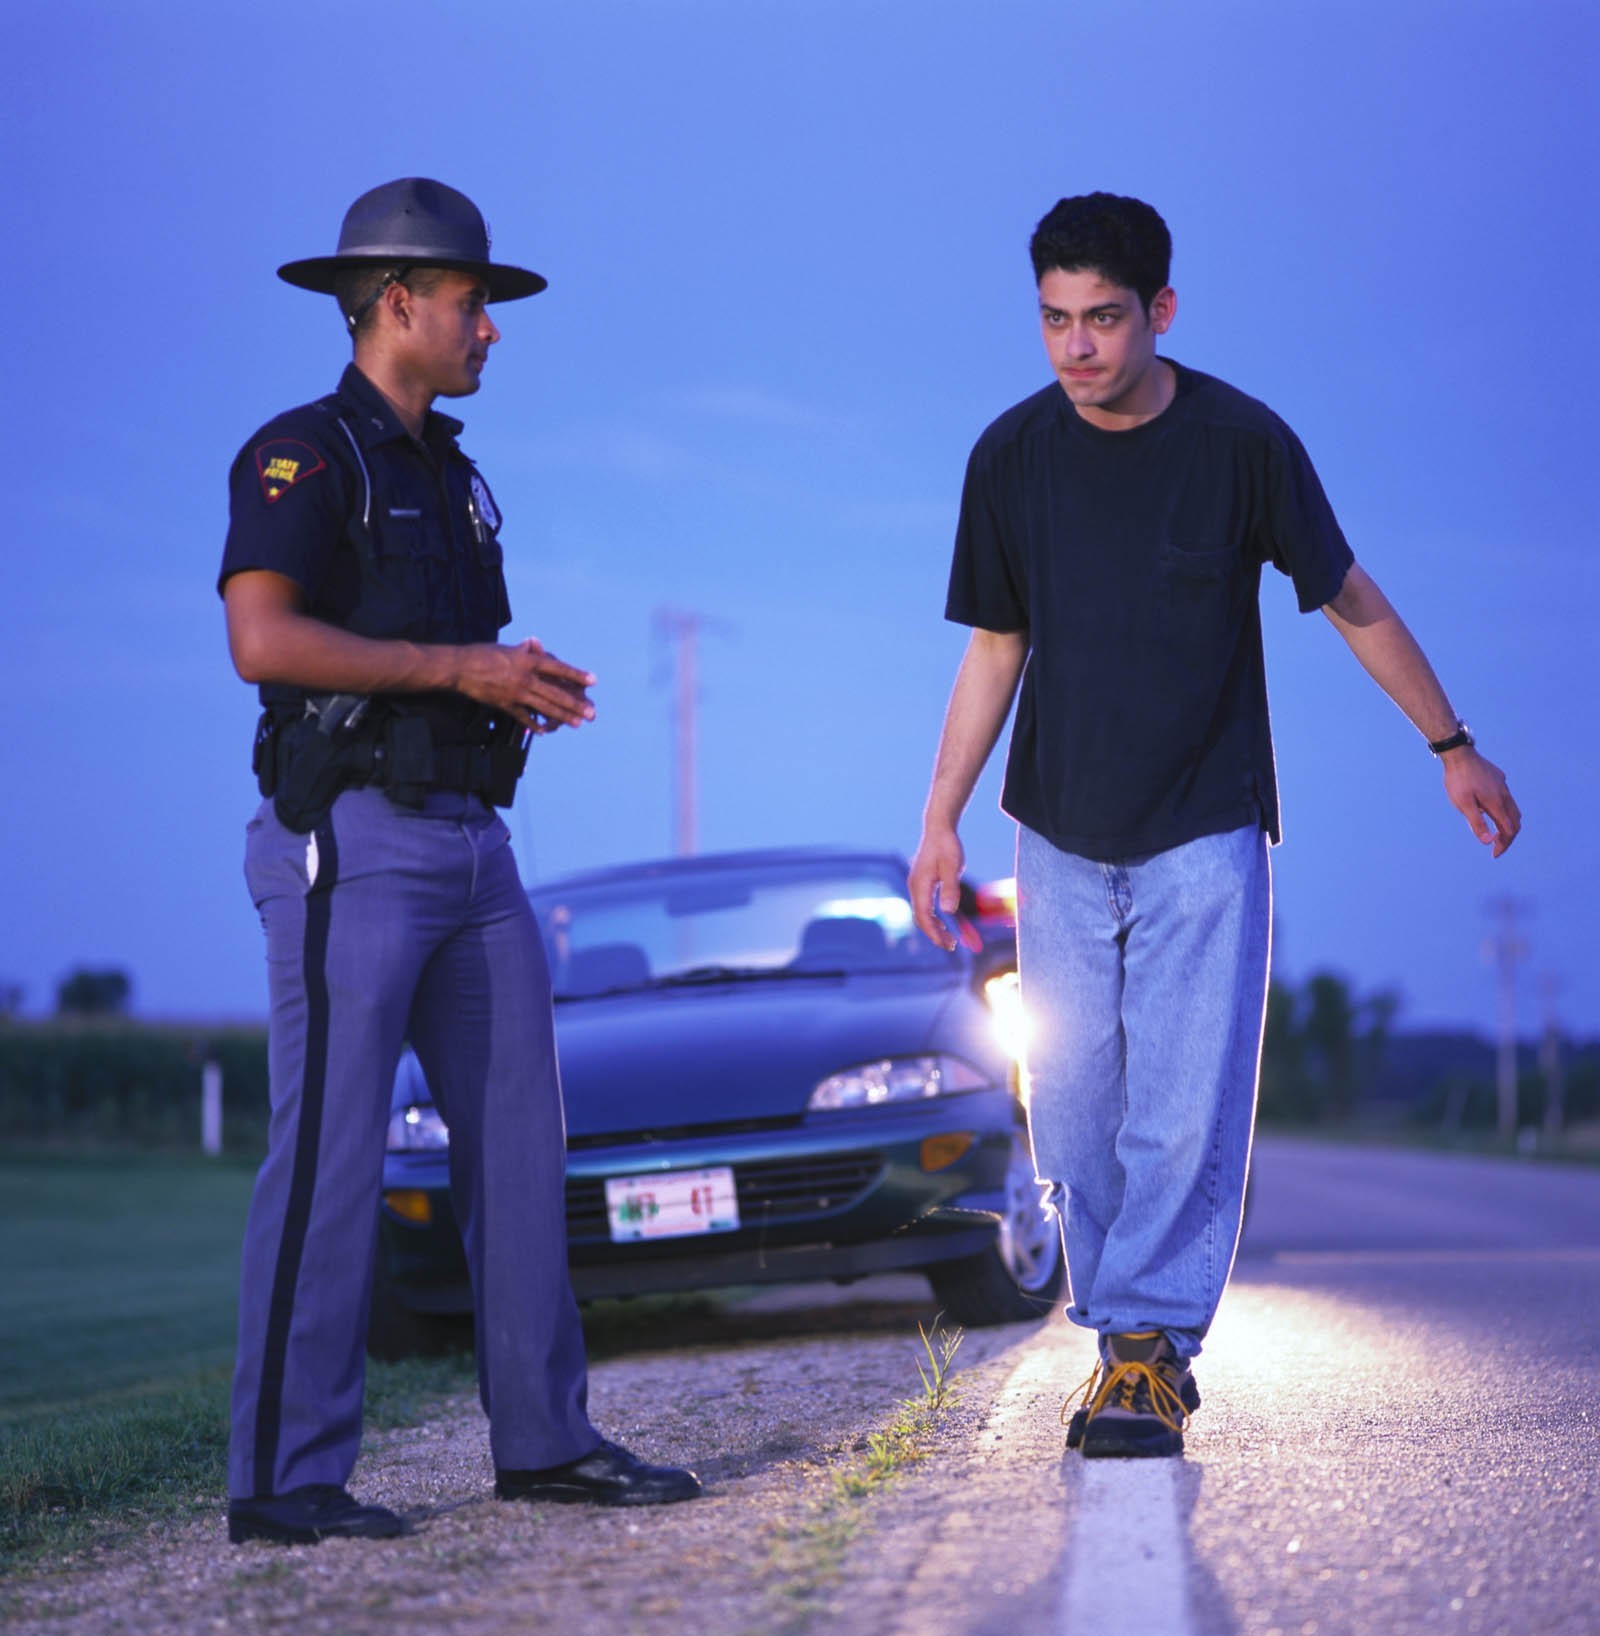 Tests for field sobriety